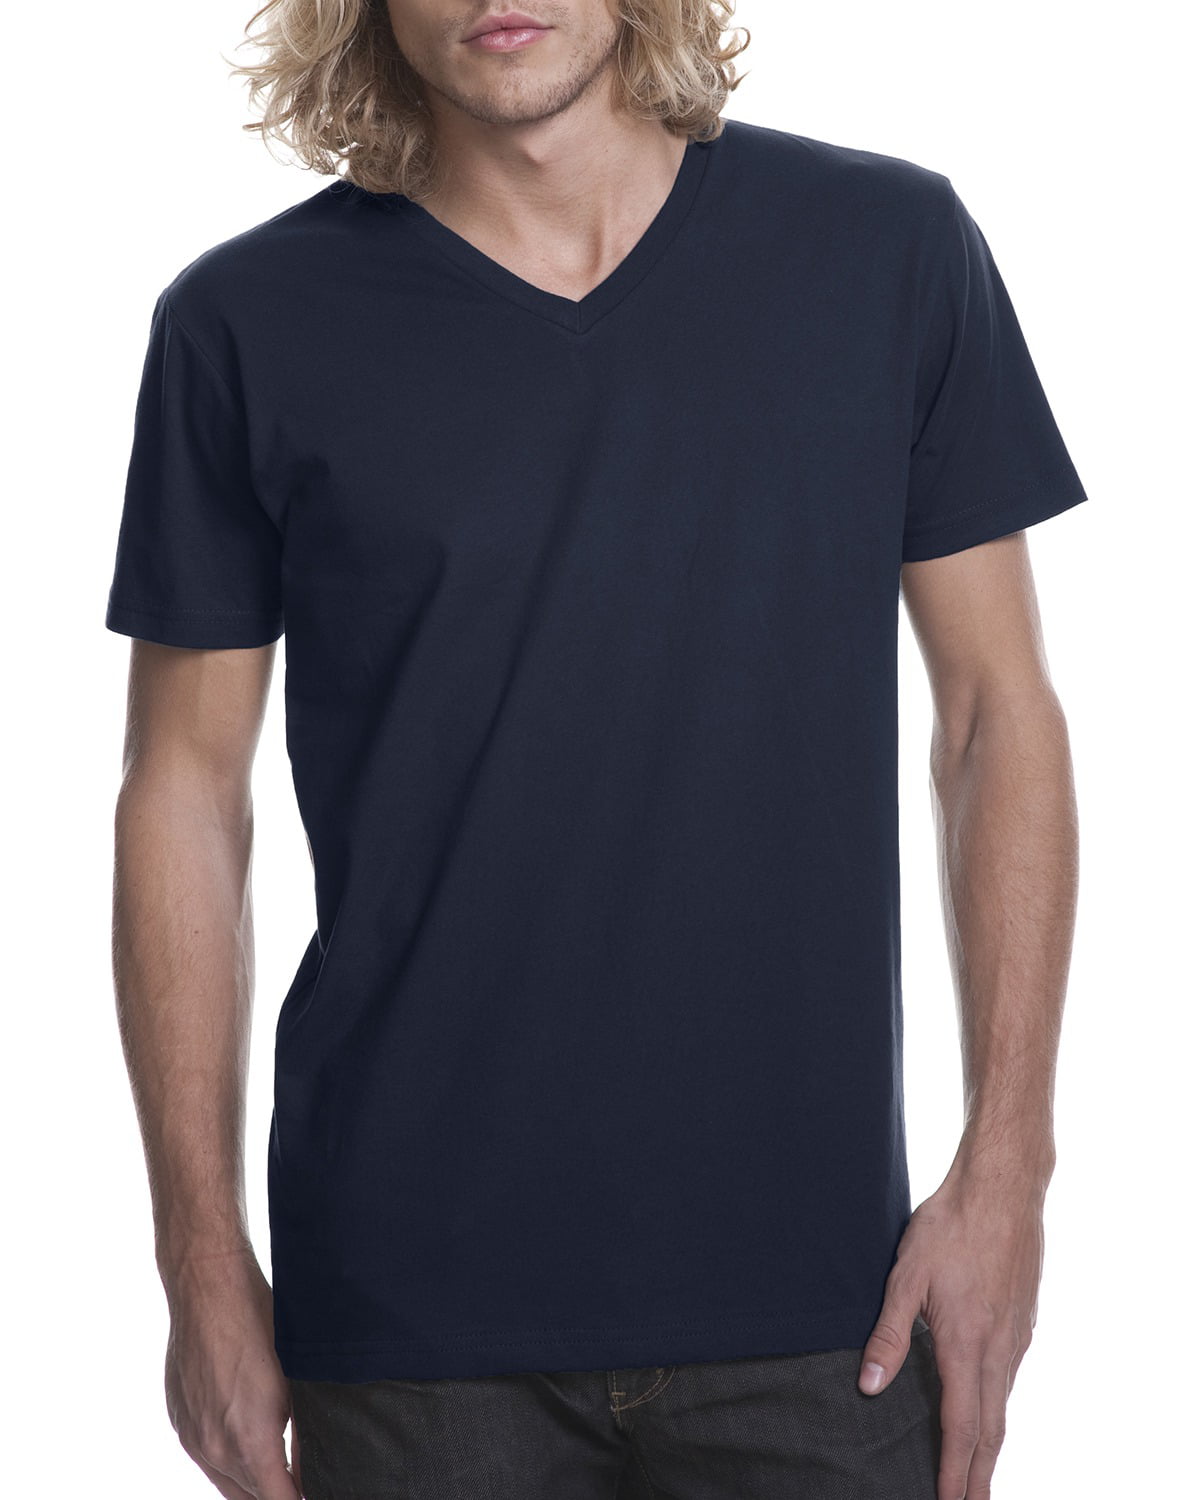 Next Level 100% Combed Cotton Tee Mens Short Sleeve T-Shirt Strong Faded